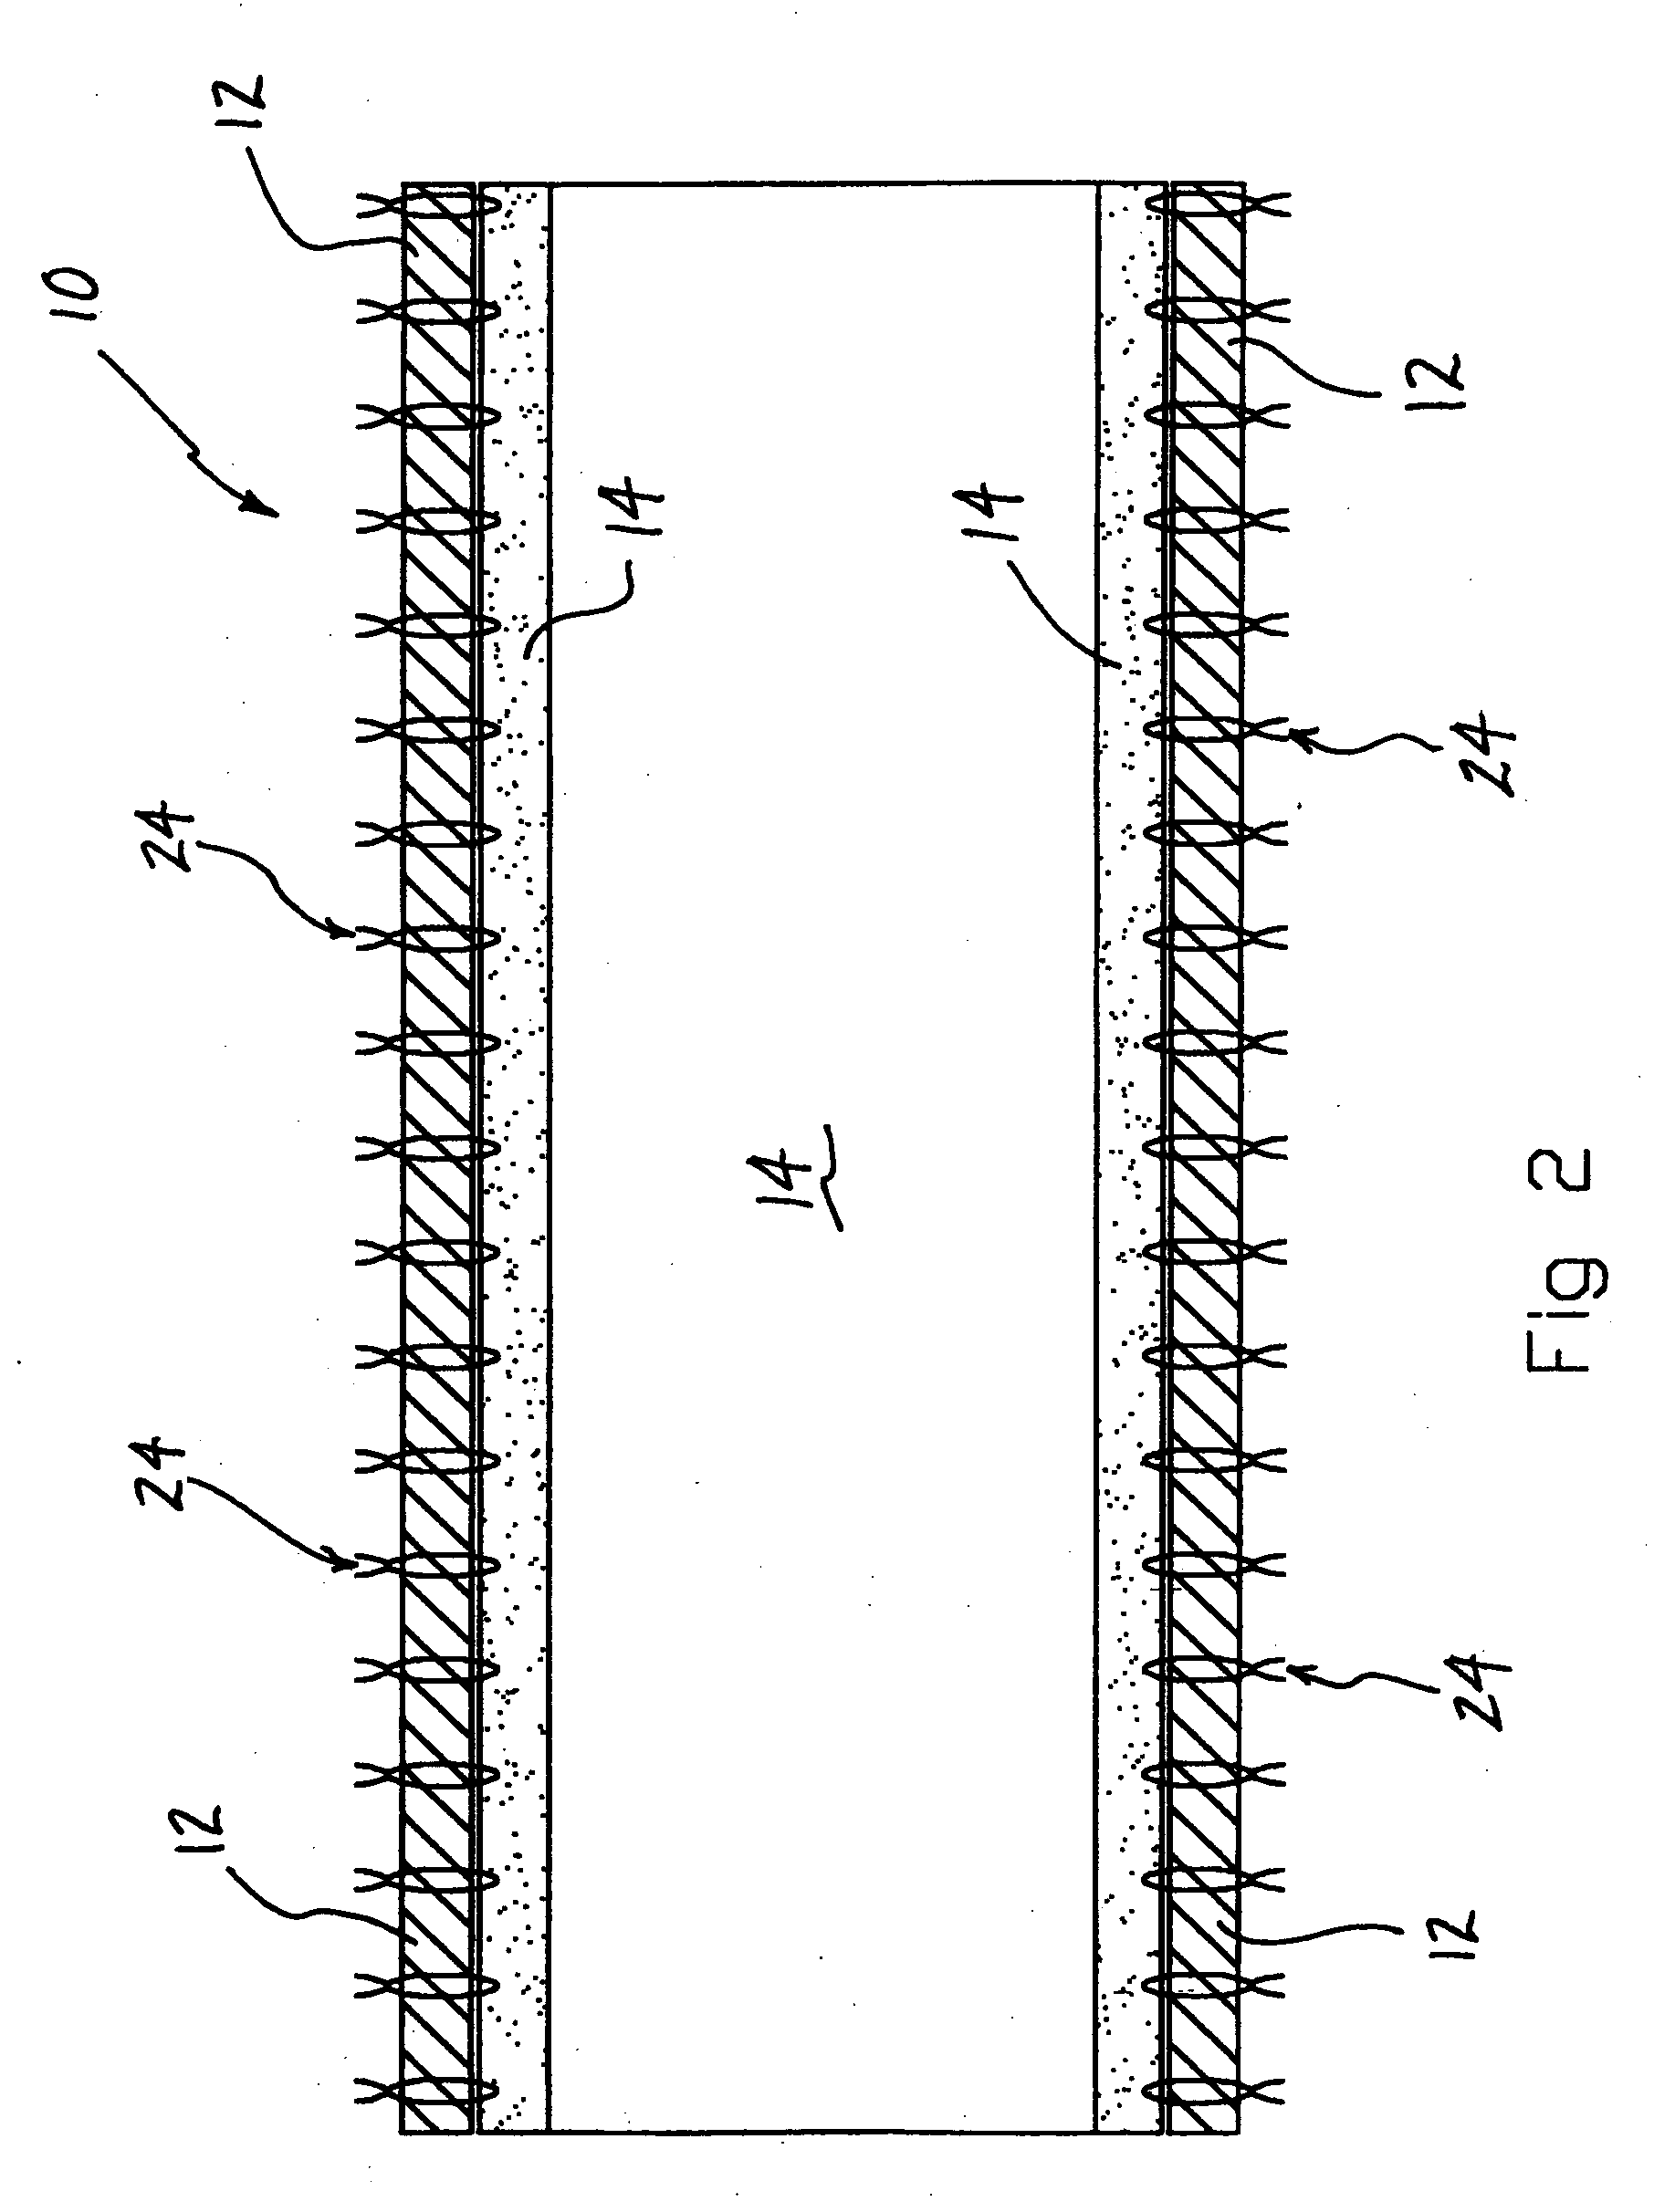 Systems and methods for overcoming or preventing vascular flow restrictions